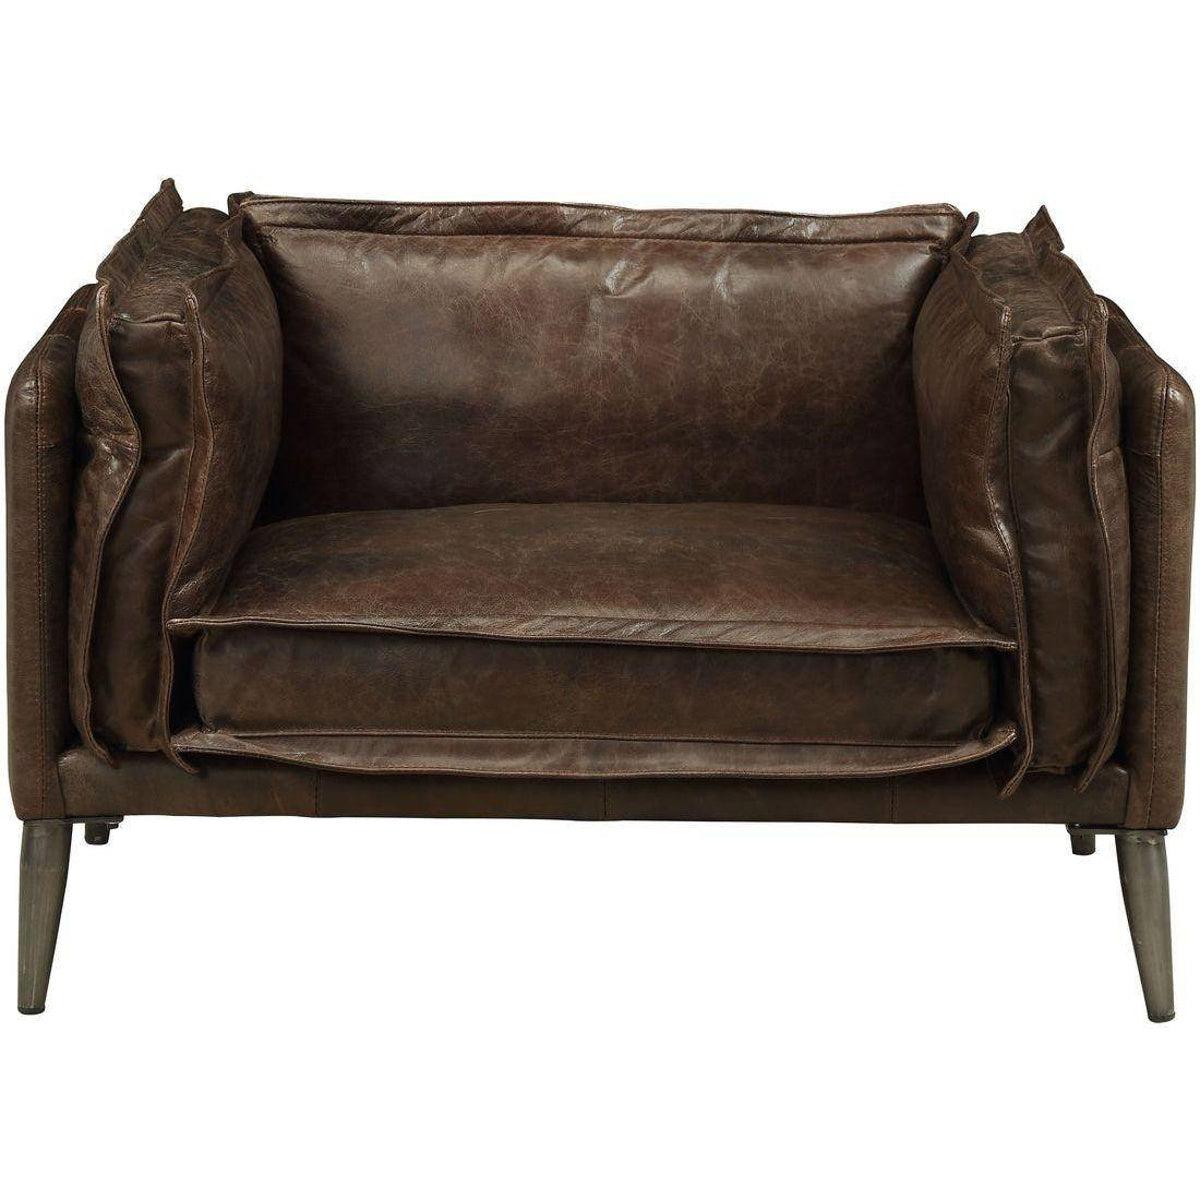 Acme Furniture Porchester Chair in Distress Chocolate 52482  Las Vegas Furniture Stores